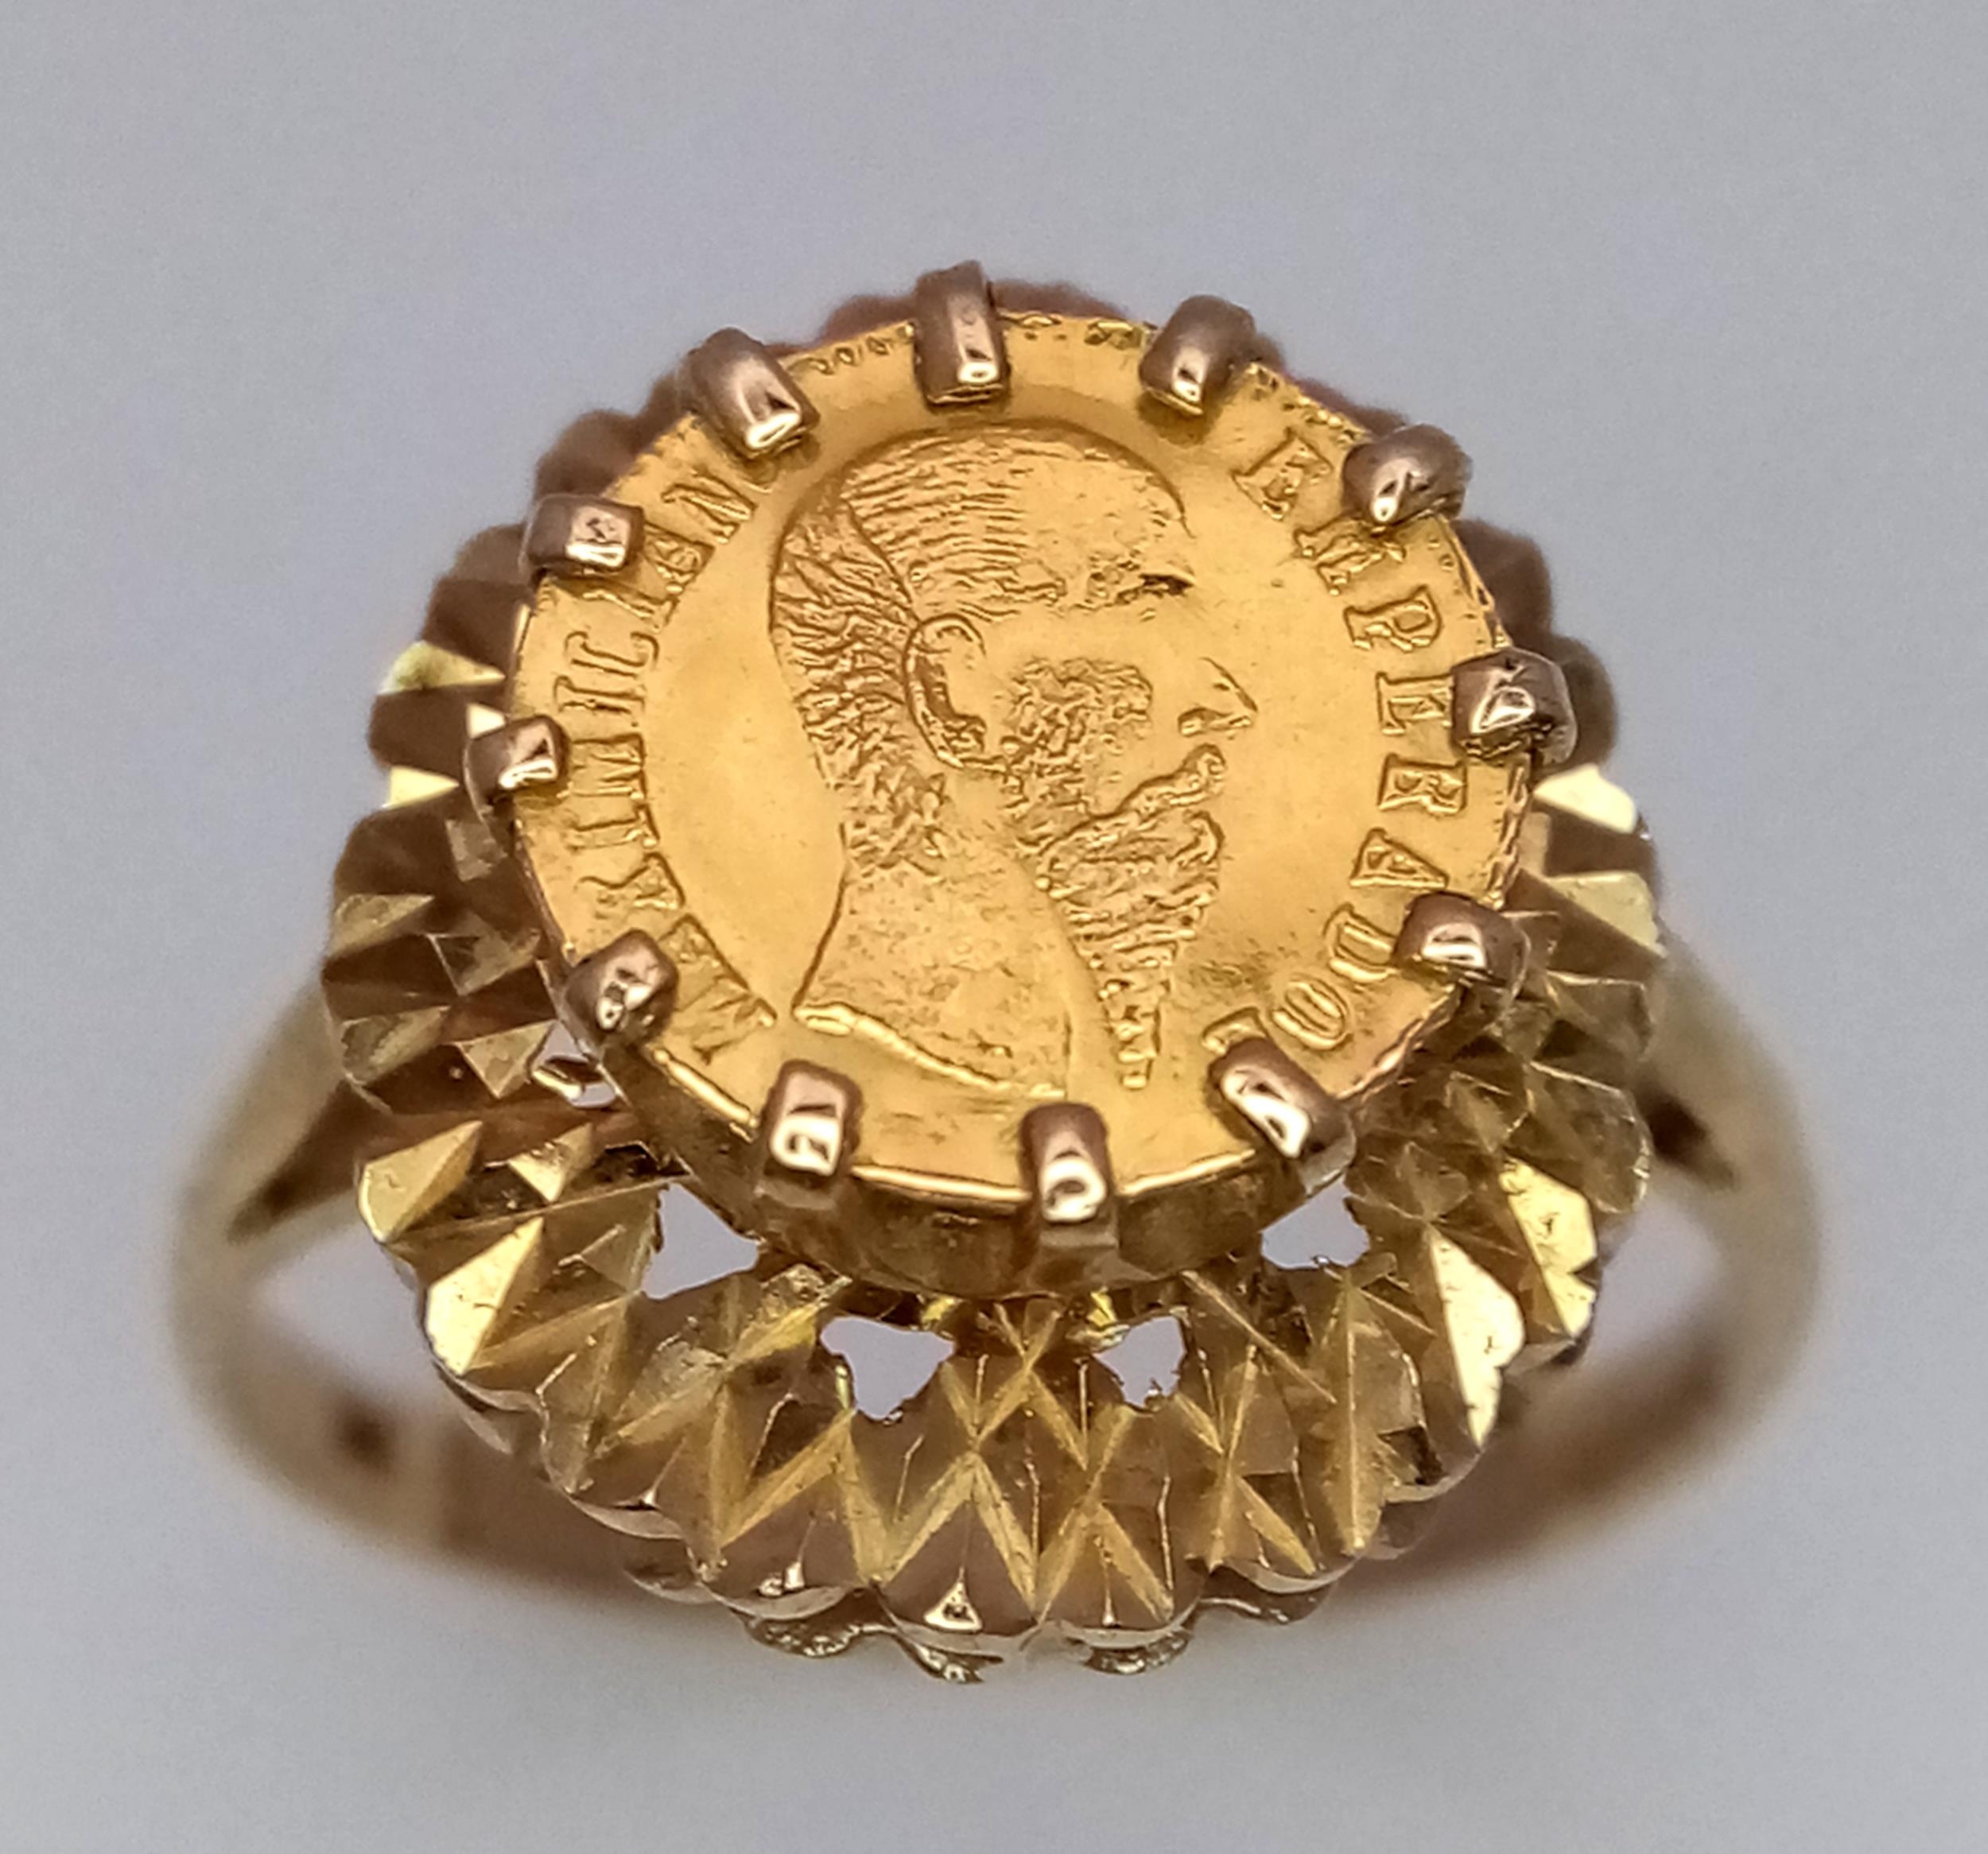 A 9 Carat Gold Tier Mounted Mexican/Columbian Gold Coin Set Ring Size P. Lower Crown Tier Measures